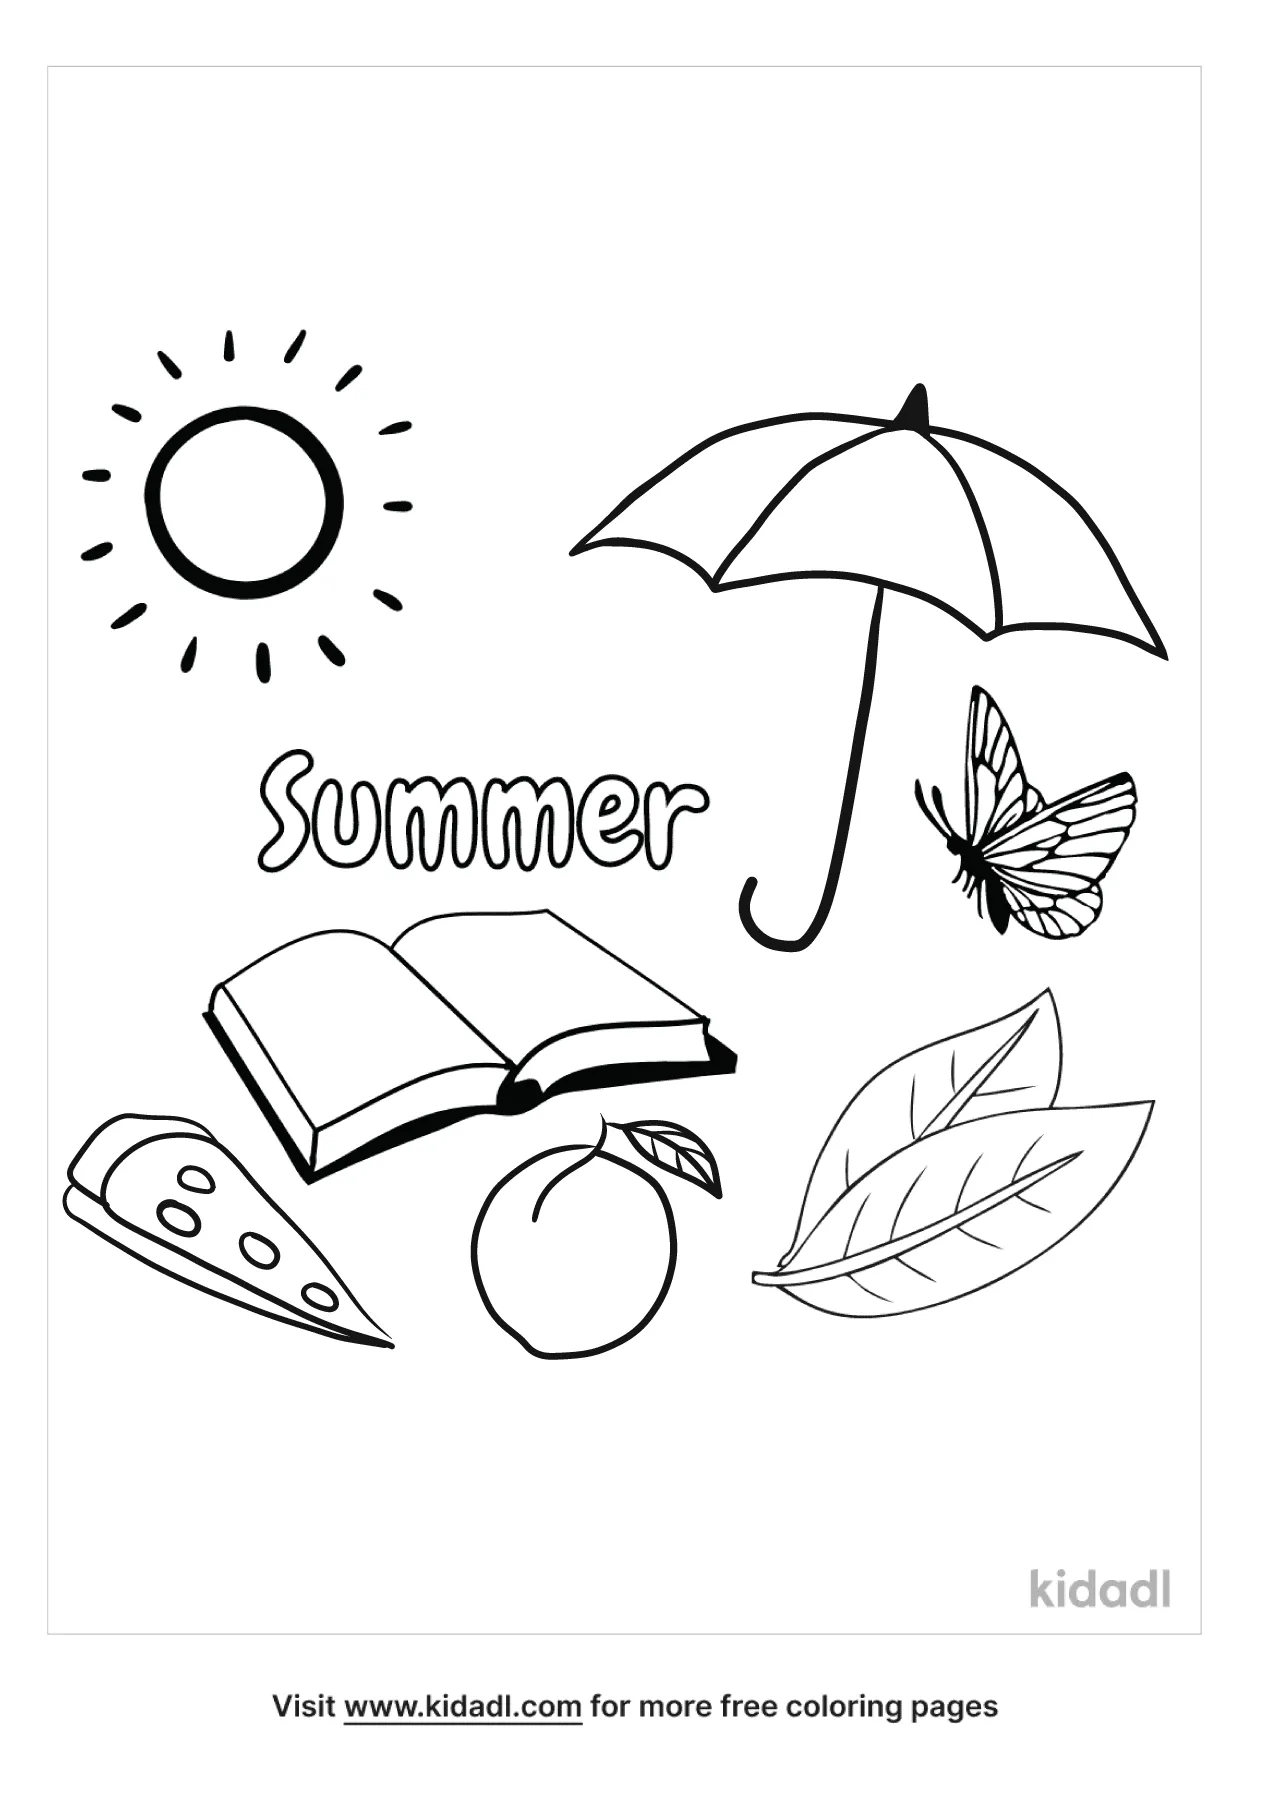 Summer Doodle Coloring Page